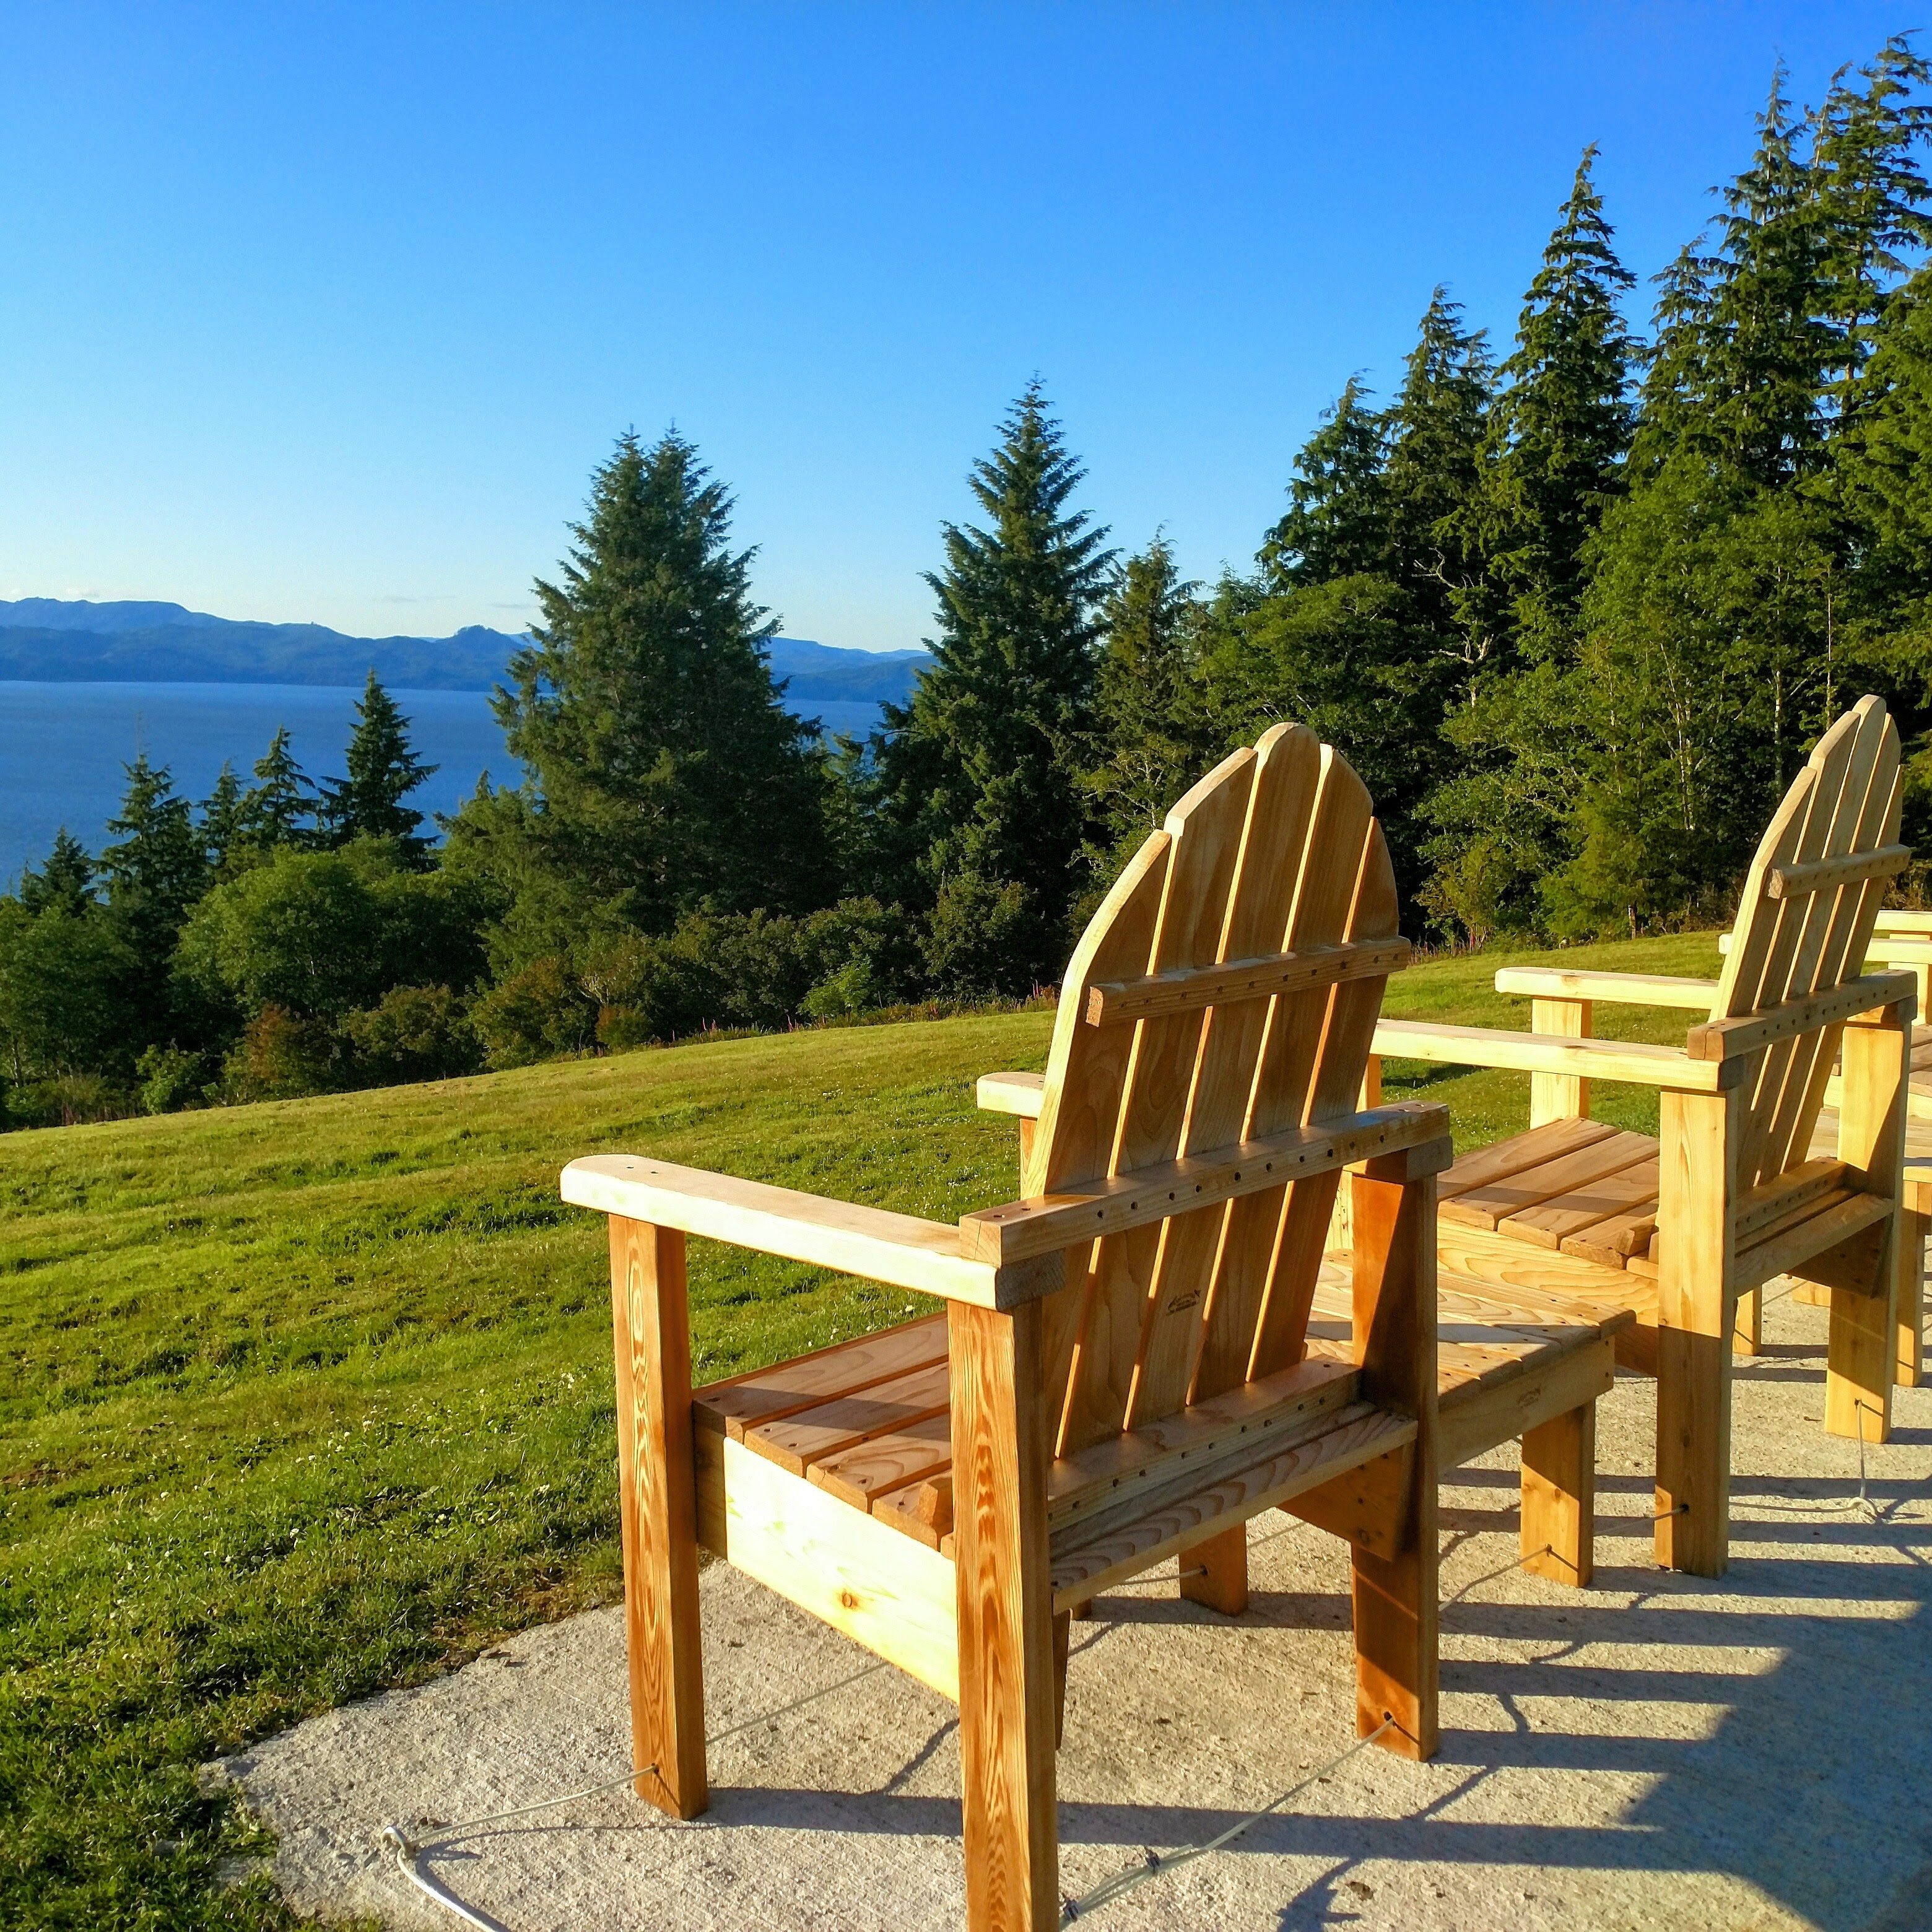 Seats with a view of the Columbia estuary